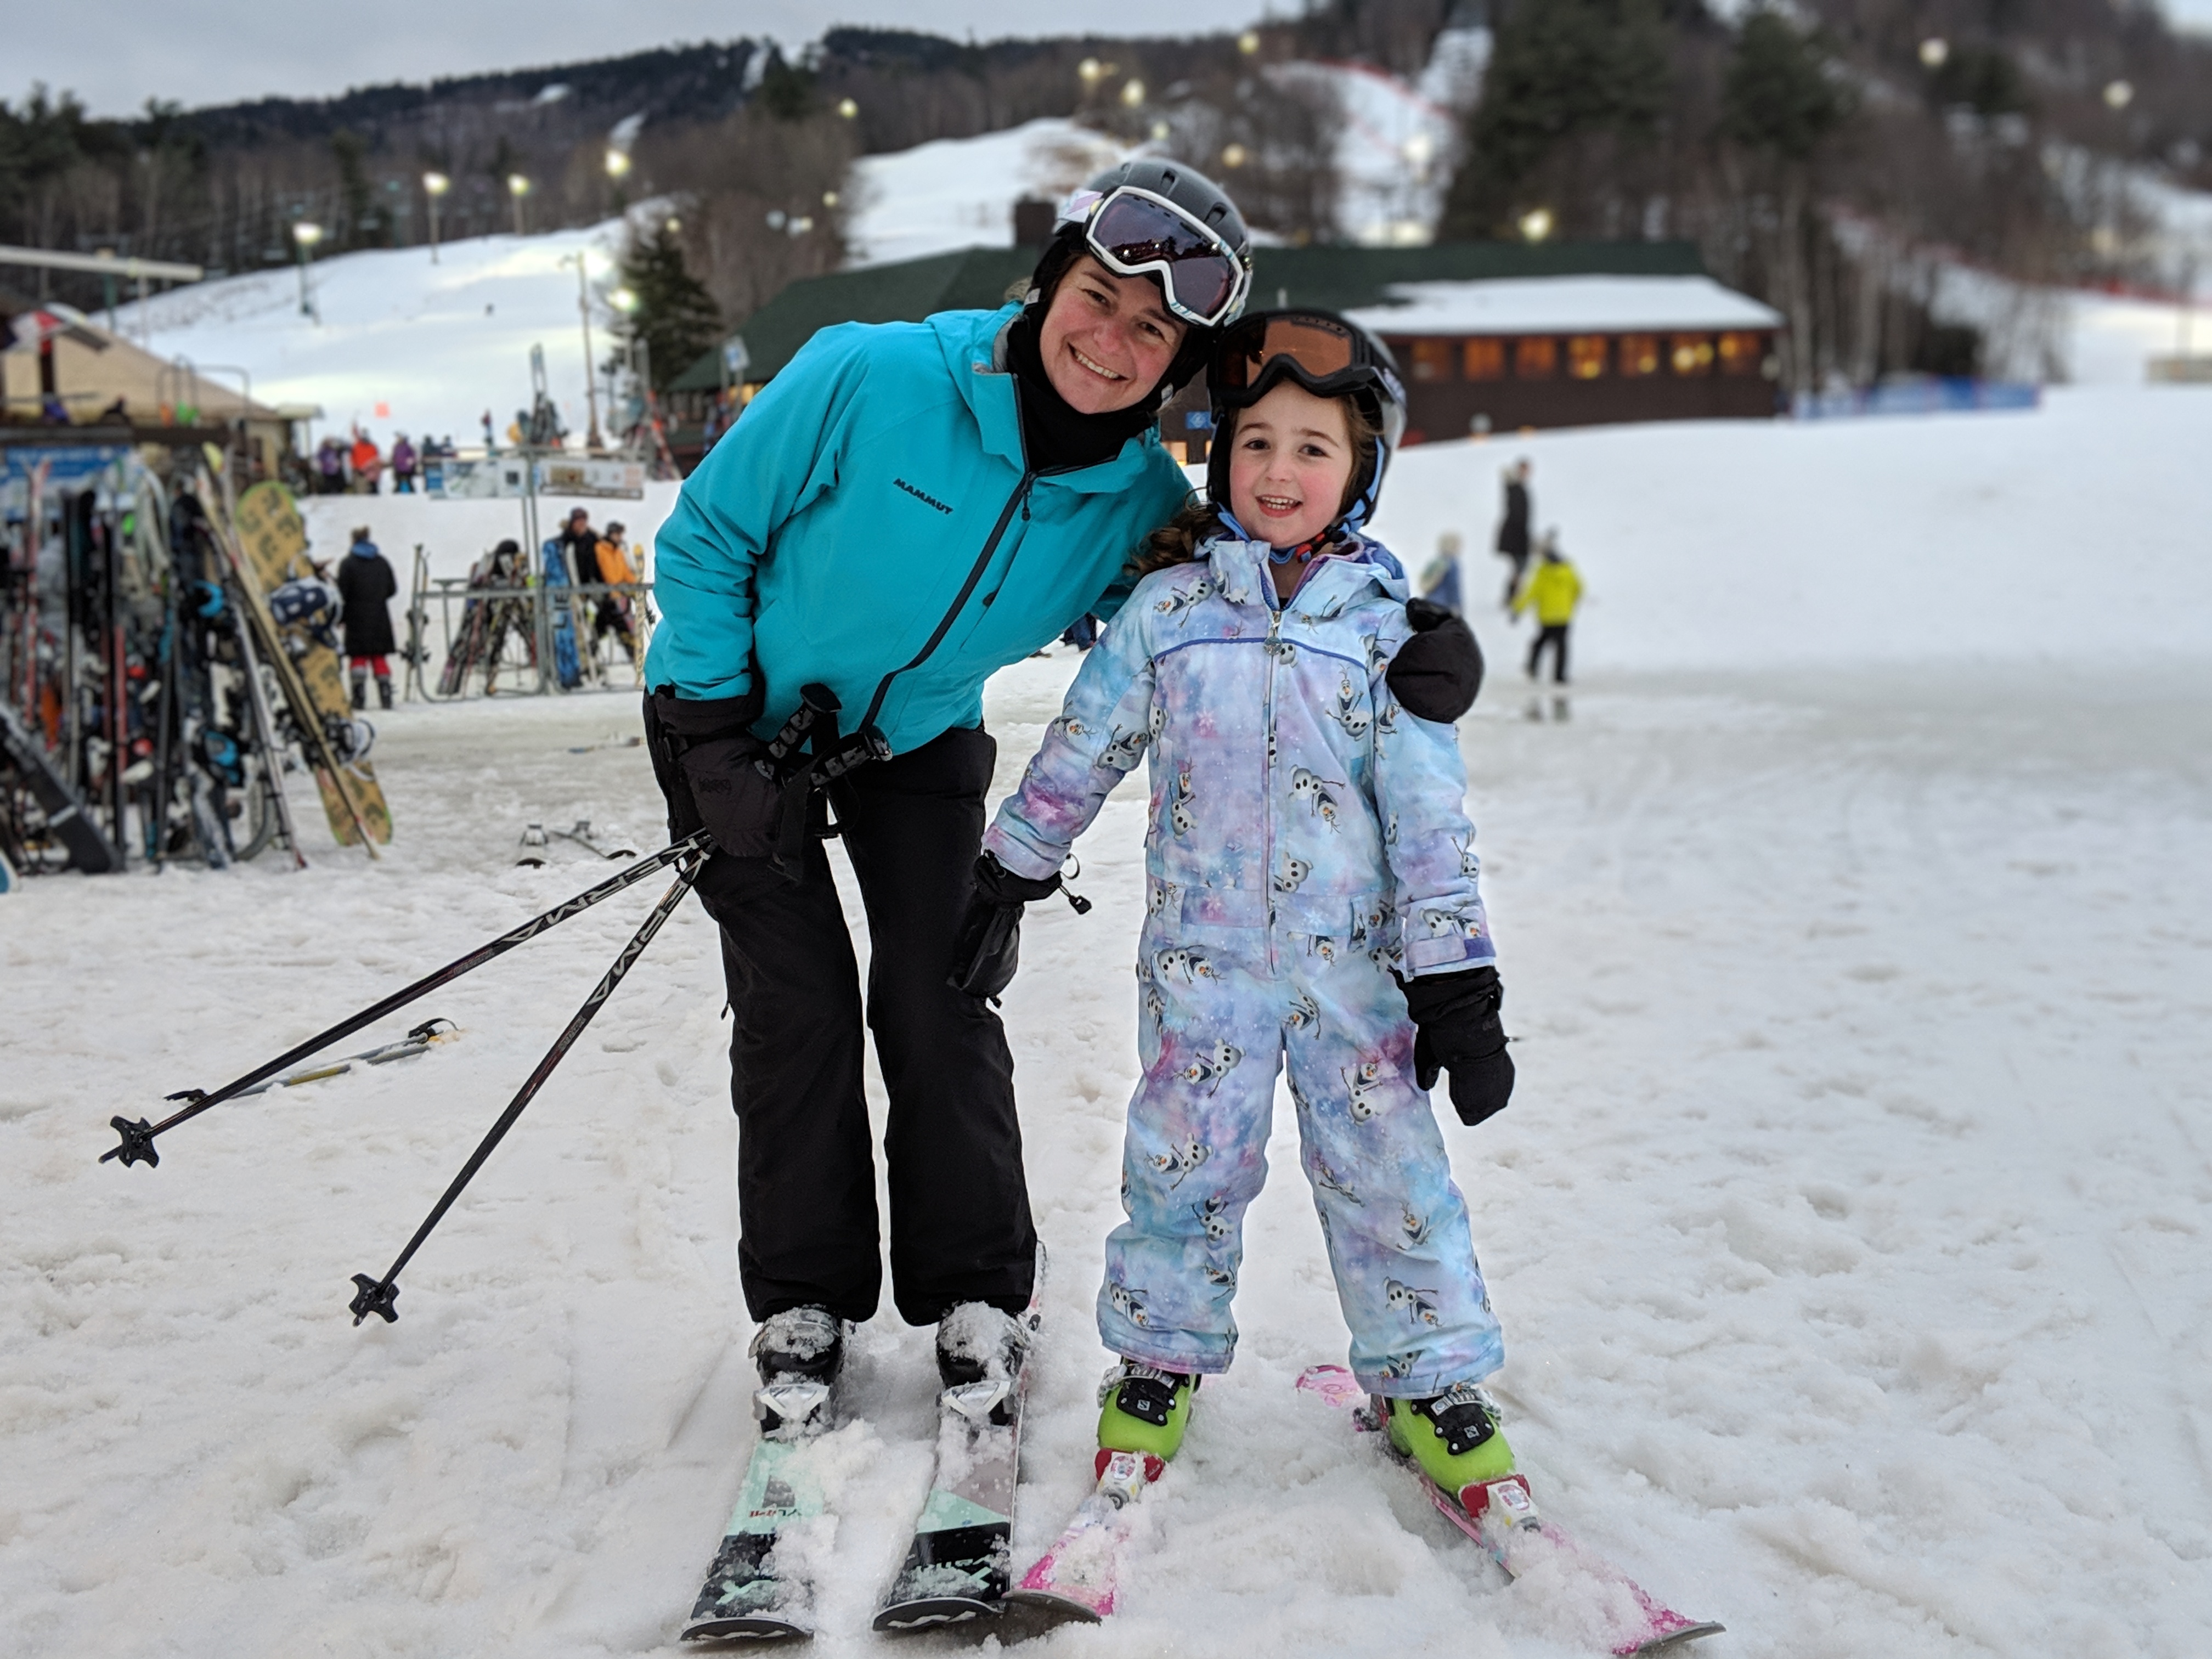 a woman and child on skis